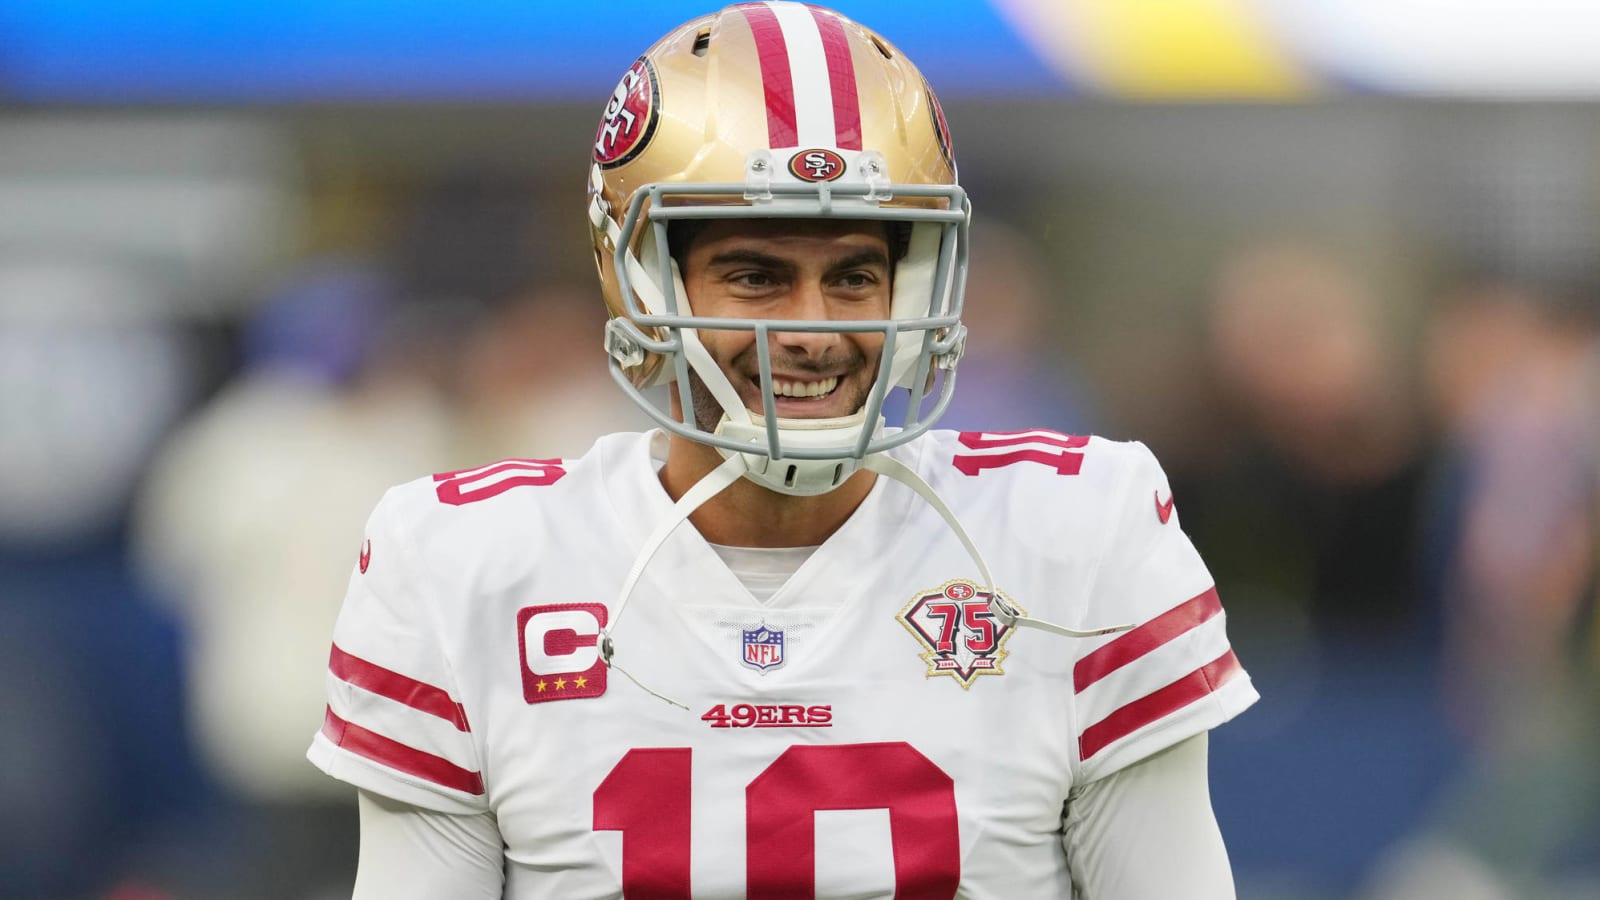 Garoppolo says goodbye to 49ers fans, hints he'll be traded